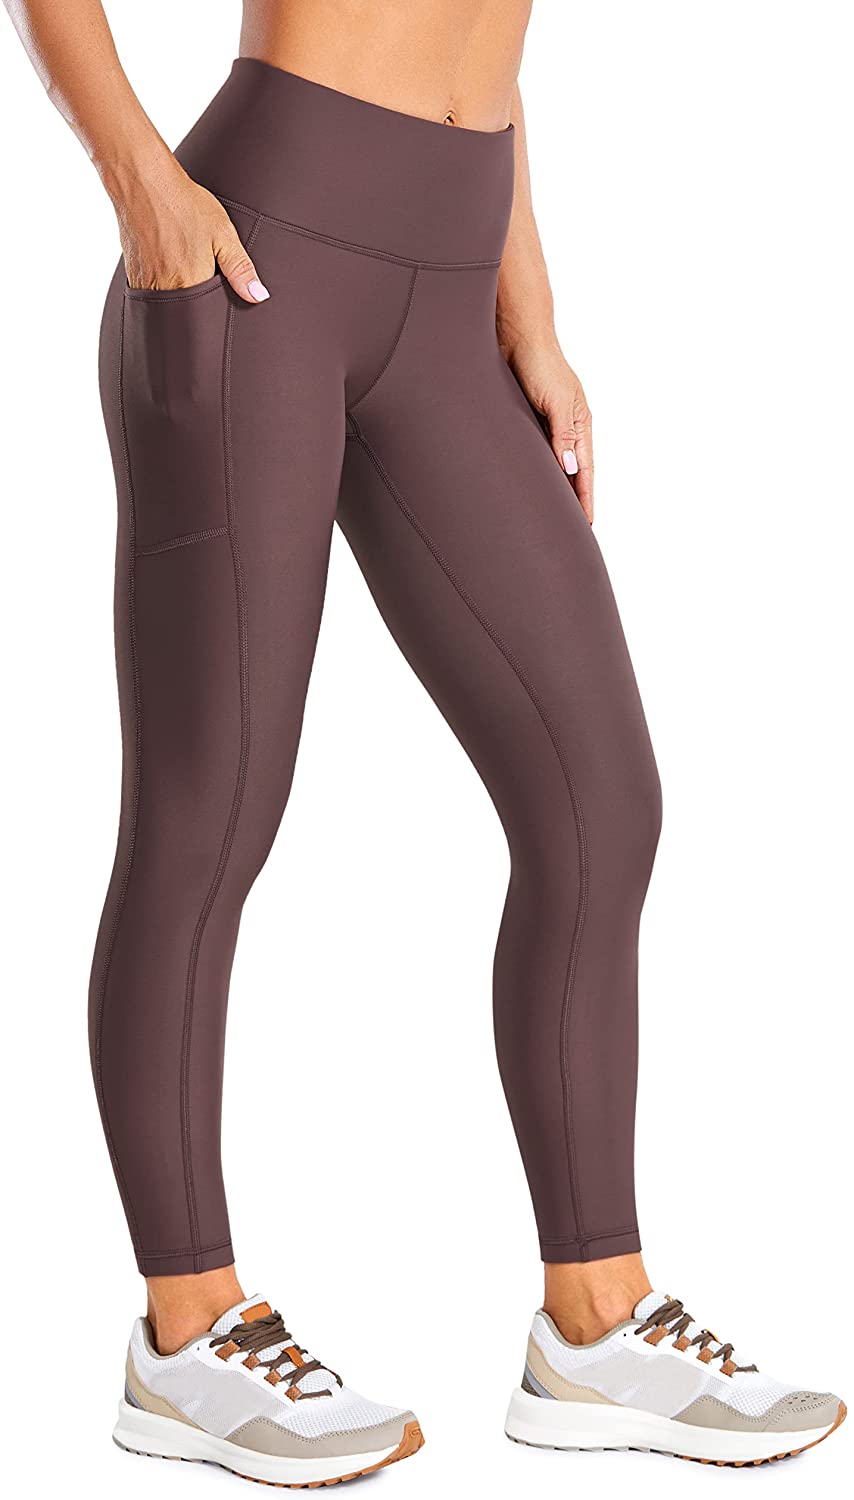 CRZ YOGA Women's Thermal Fleece Lined Leggings 25 Inches - High